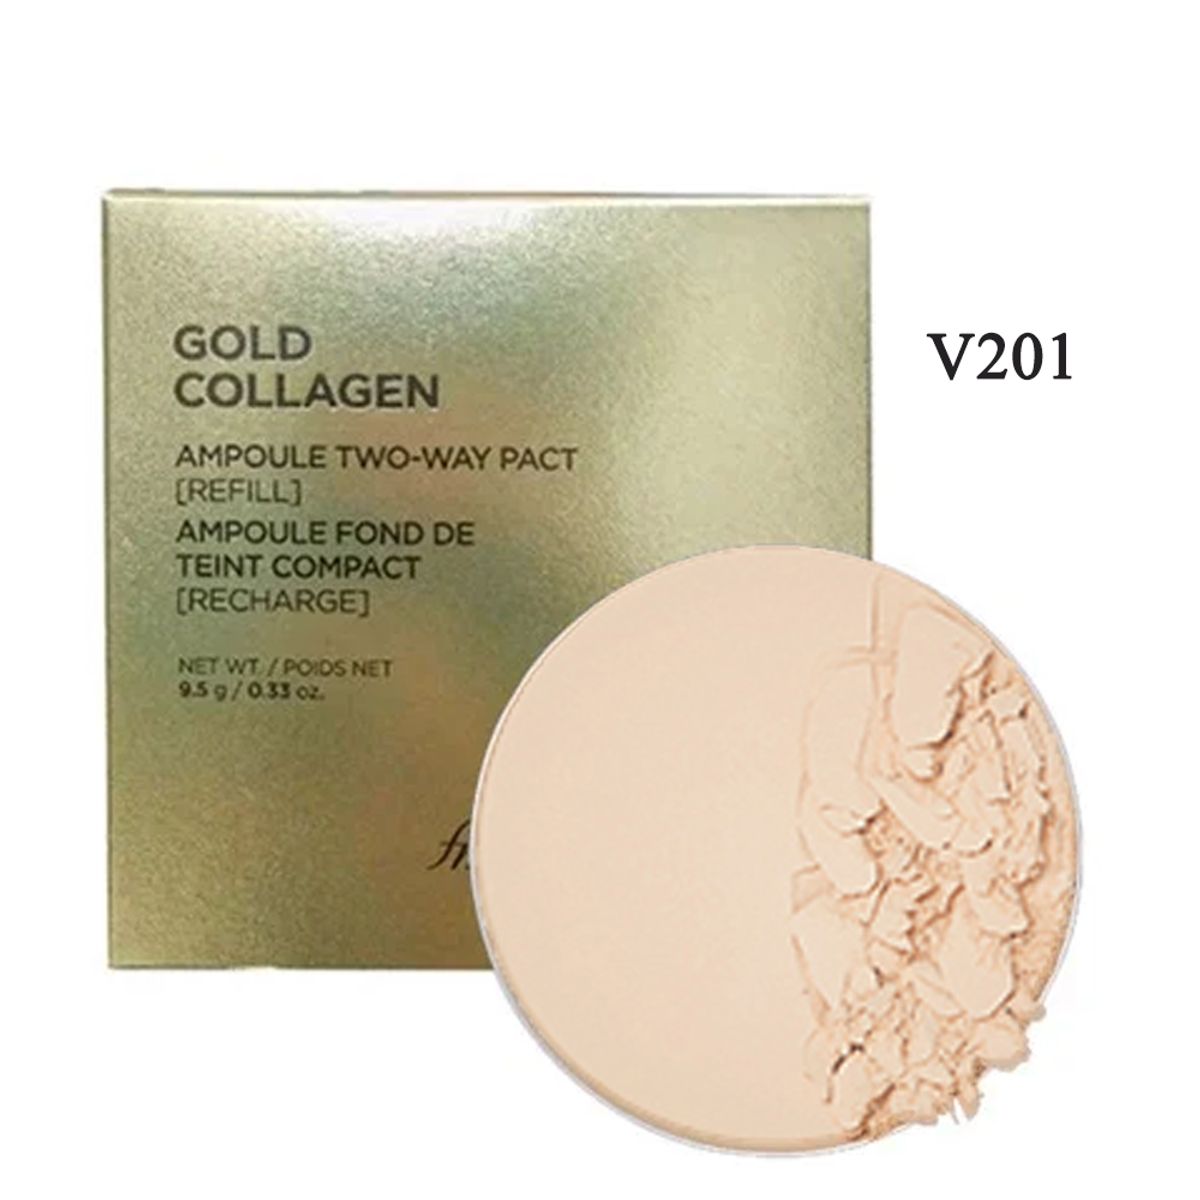 gift-fmgt-loi-phan-nen-che-khuyet-diem-thefaceshop-gold-collagen-ampoule-two-way-pact-spf30-pa-refill-v201-1